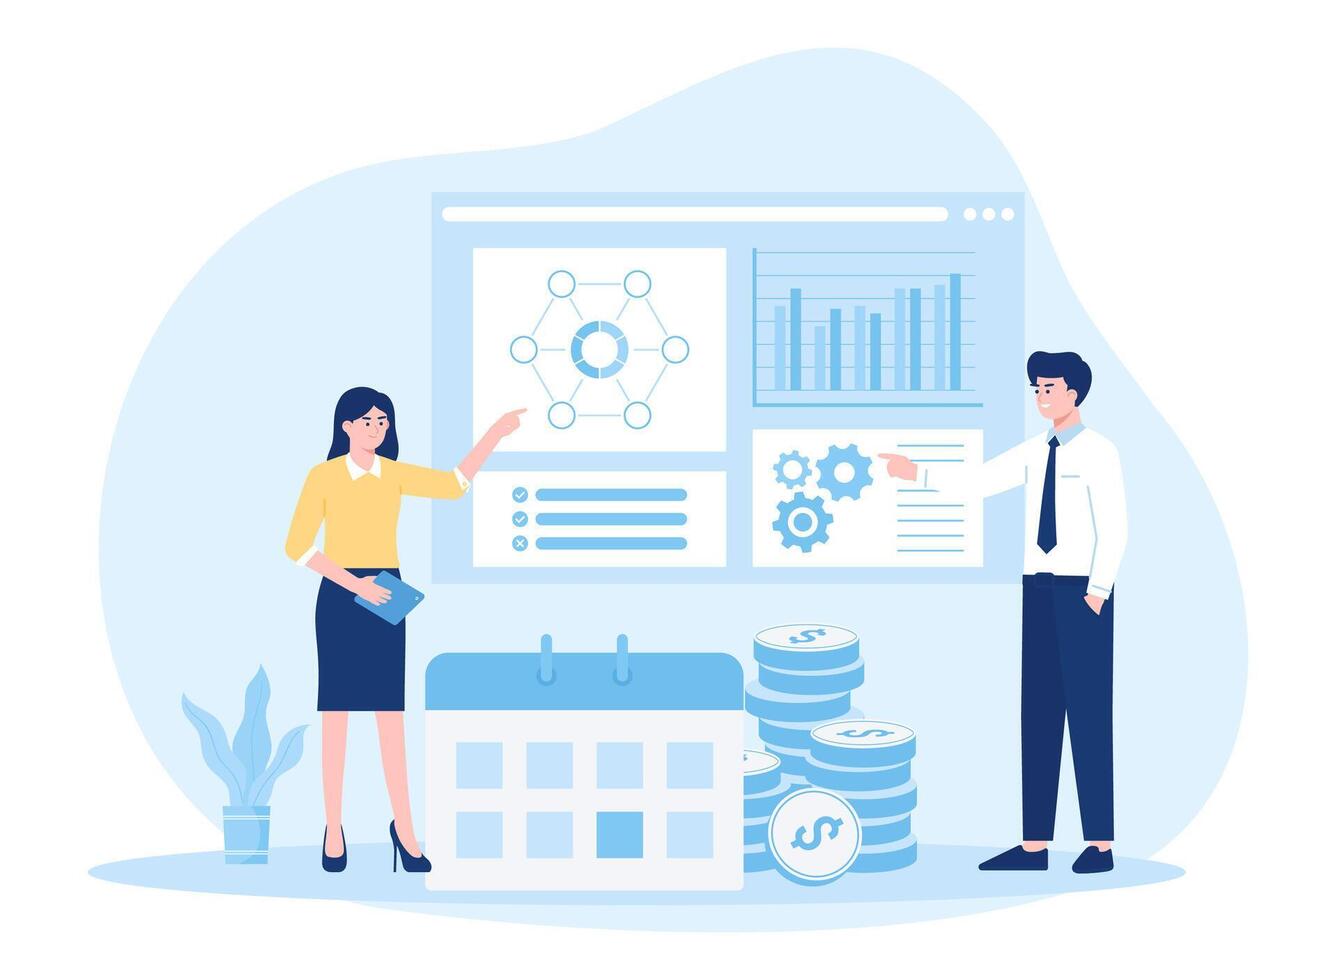 women present analysis data to colleagues concept flat illustration vector